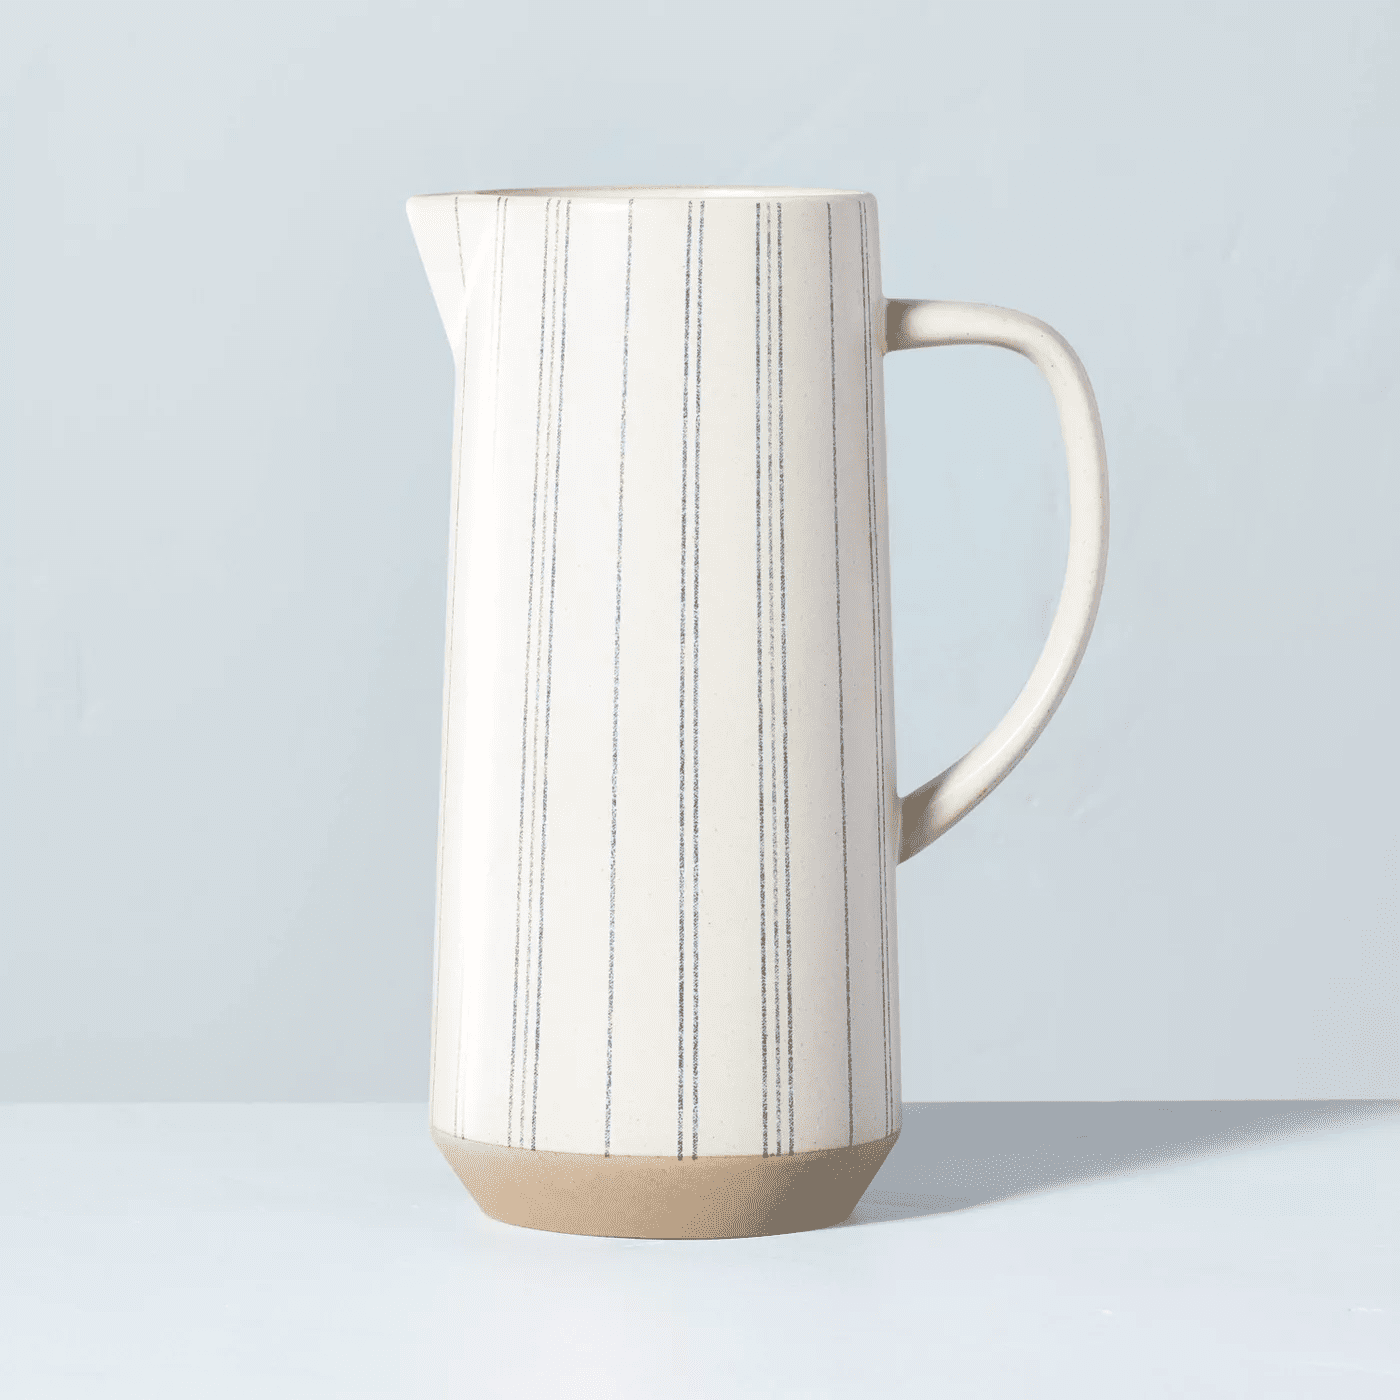 white and blue striped pitcher on light blue backdrop